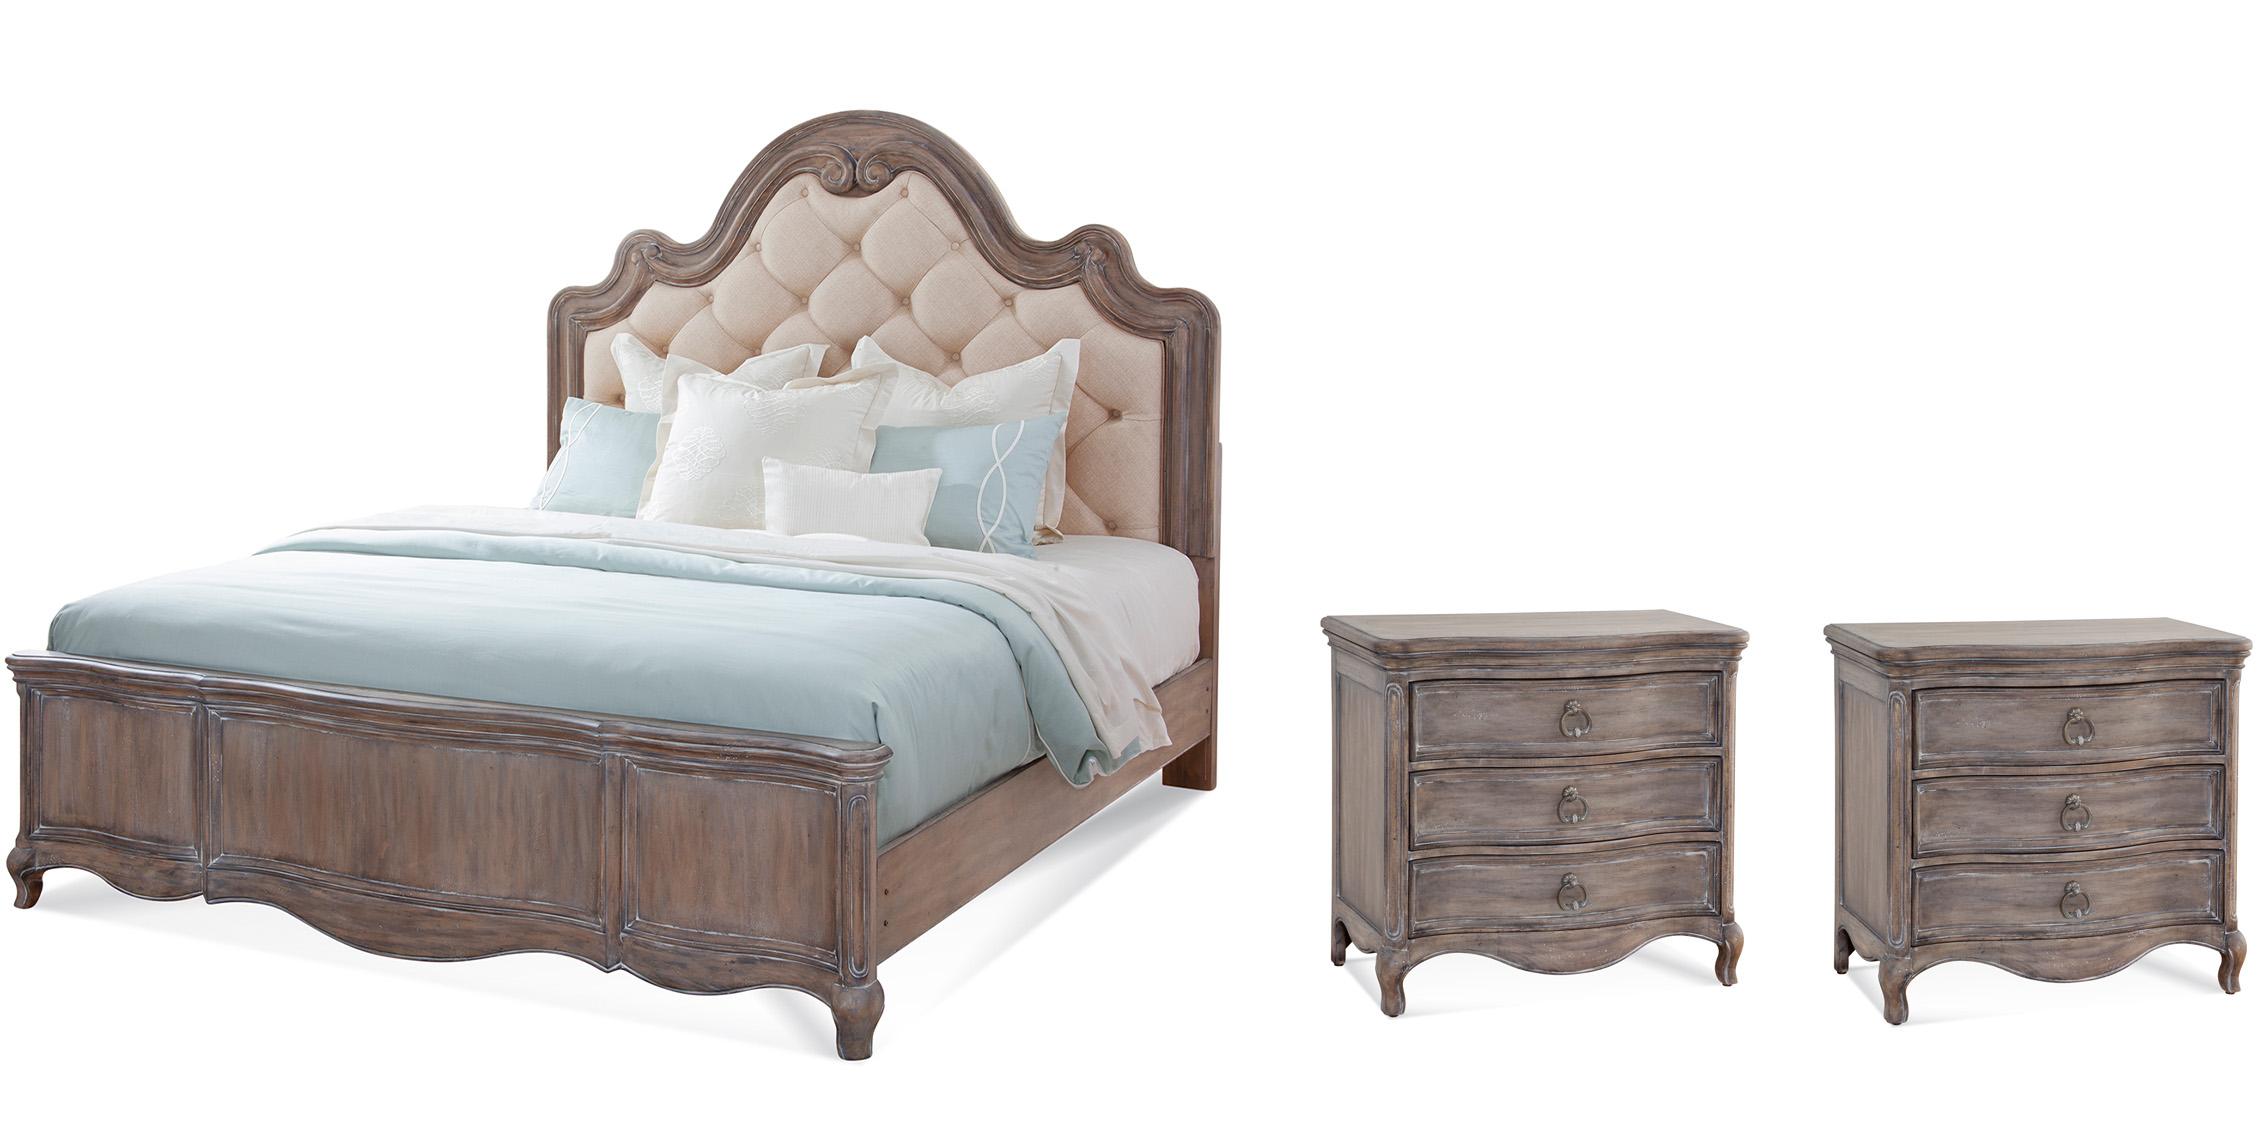 Classic, Traditional Panel Bedroom Set GENOA 1575-66TUPH-Set 1575-66TUPH-2N-3PC in Antique, Gray Fabric